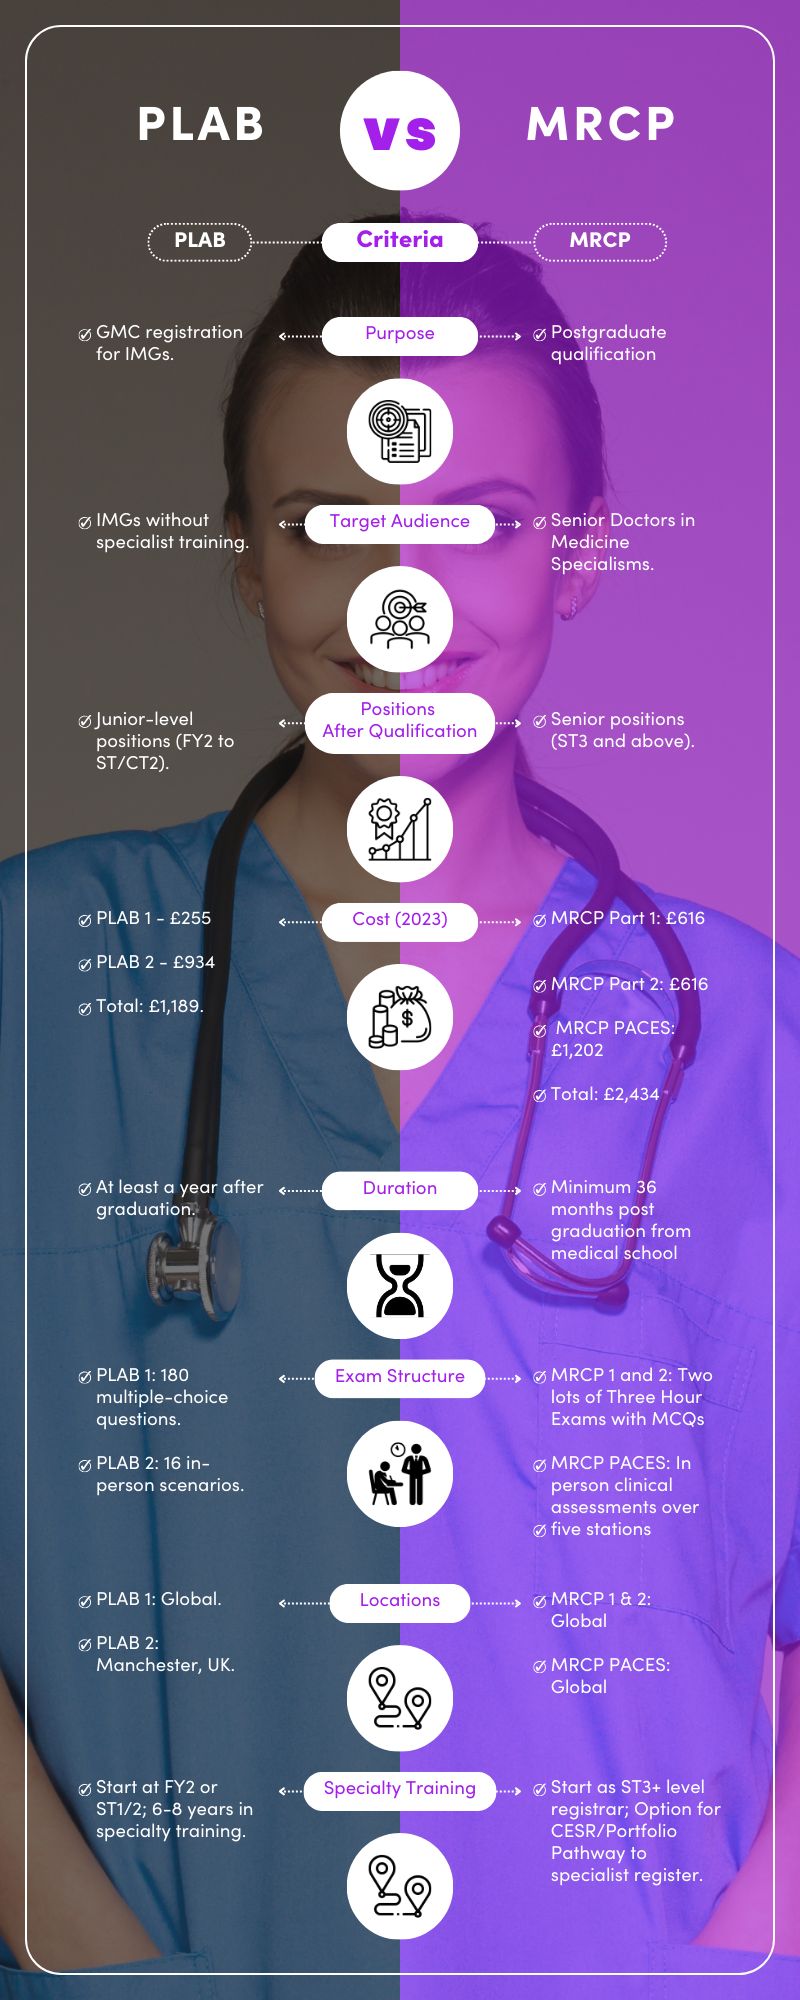 Infographic detailing the differences between PLAB and MRCP - who they are aimed at, price, location, time to complete, exam structure and job prospects